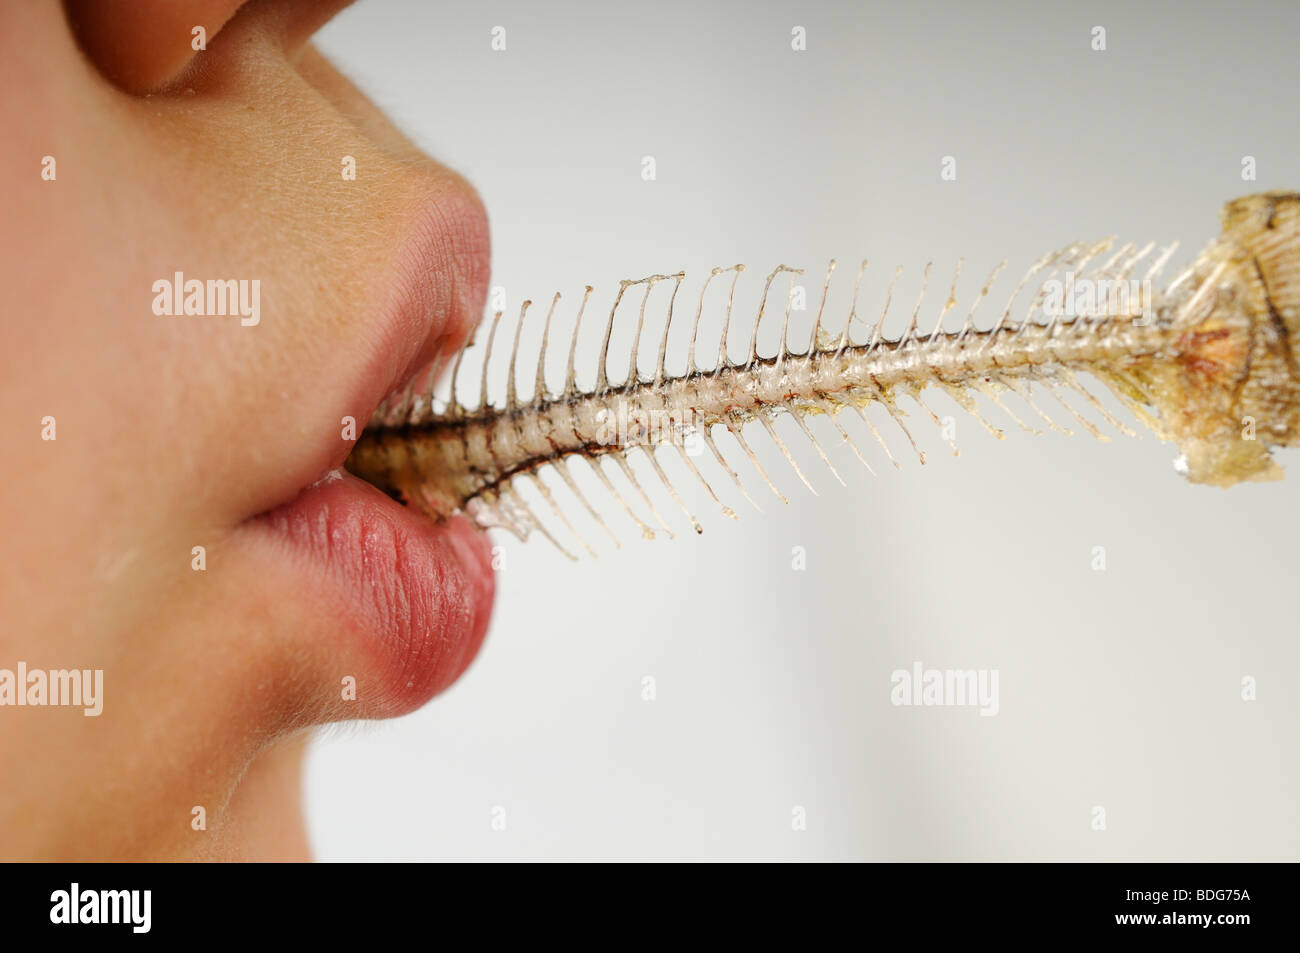 Stock photo of a young boy sucking clean the last pieces of meat from a fish skeleton. Stock Photo